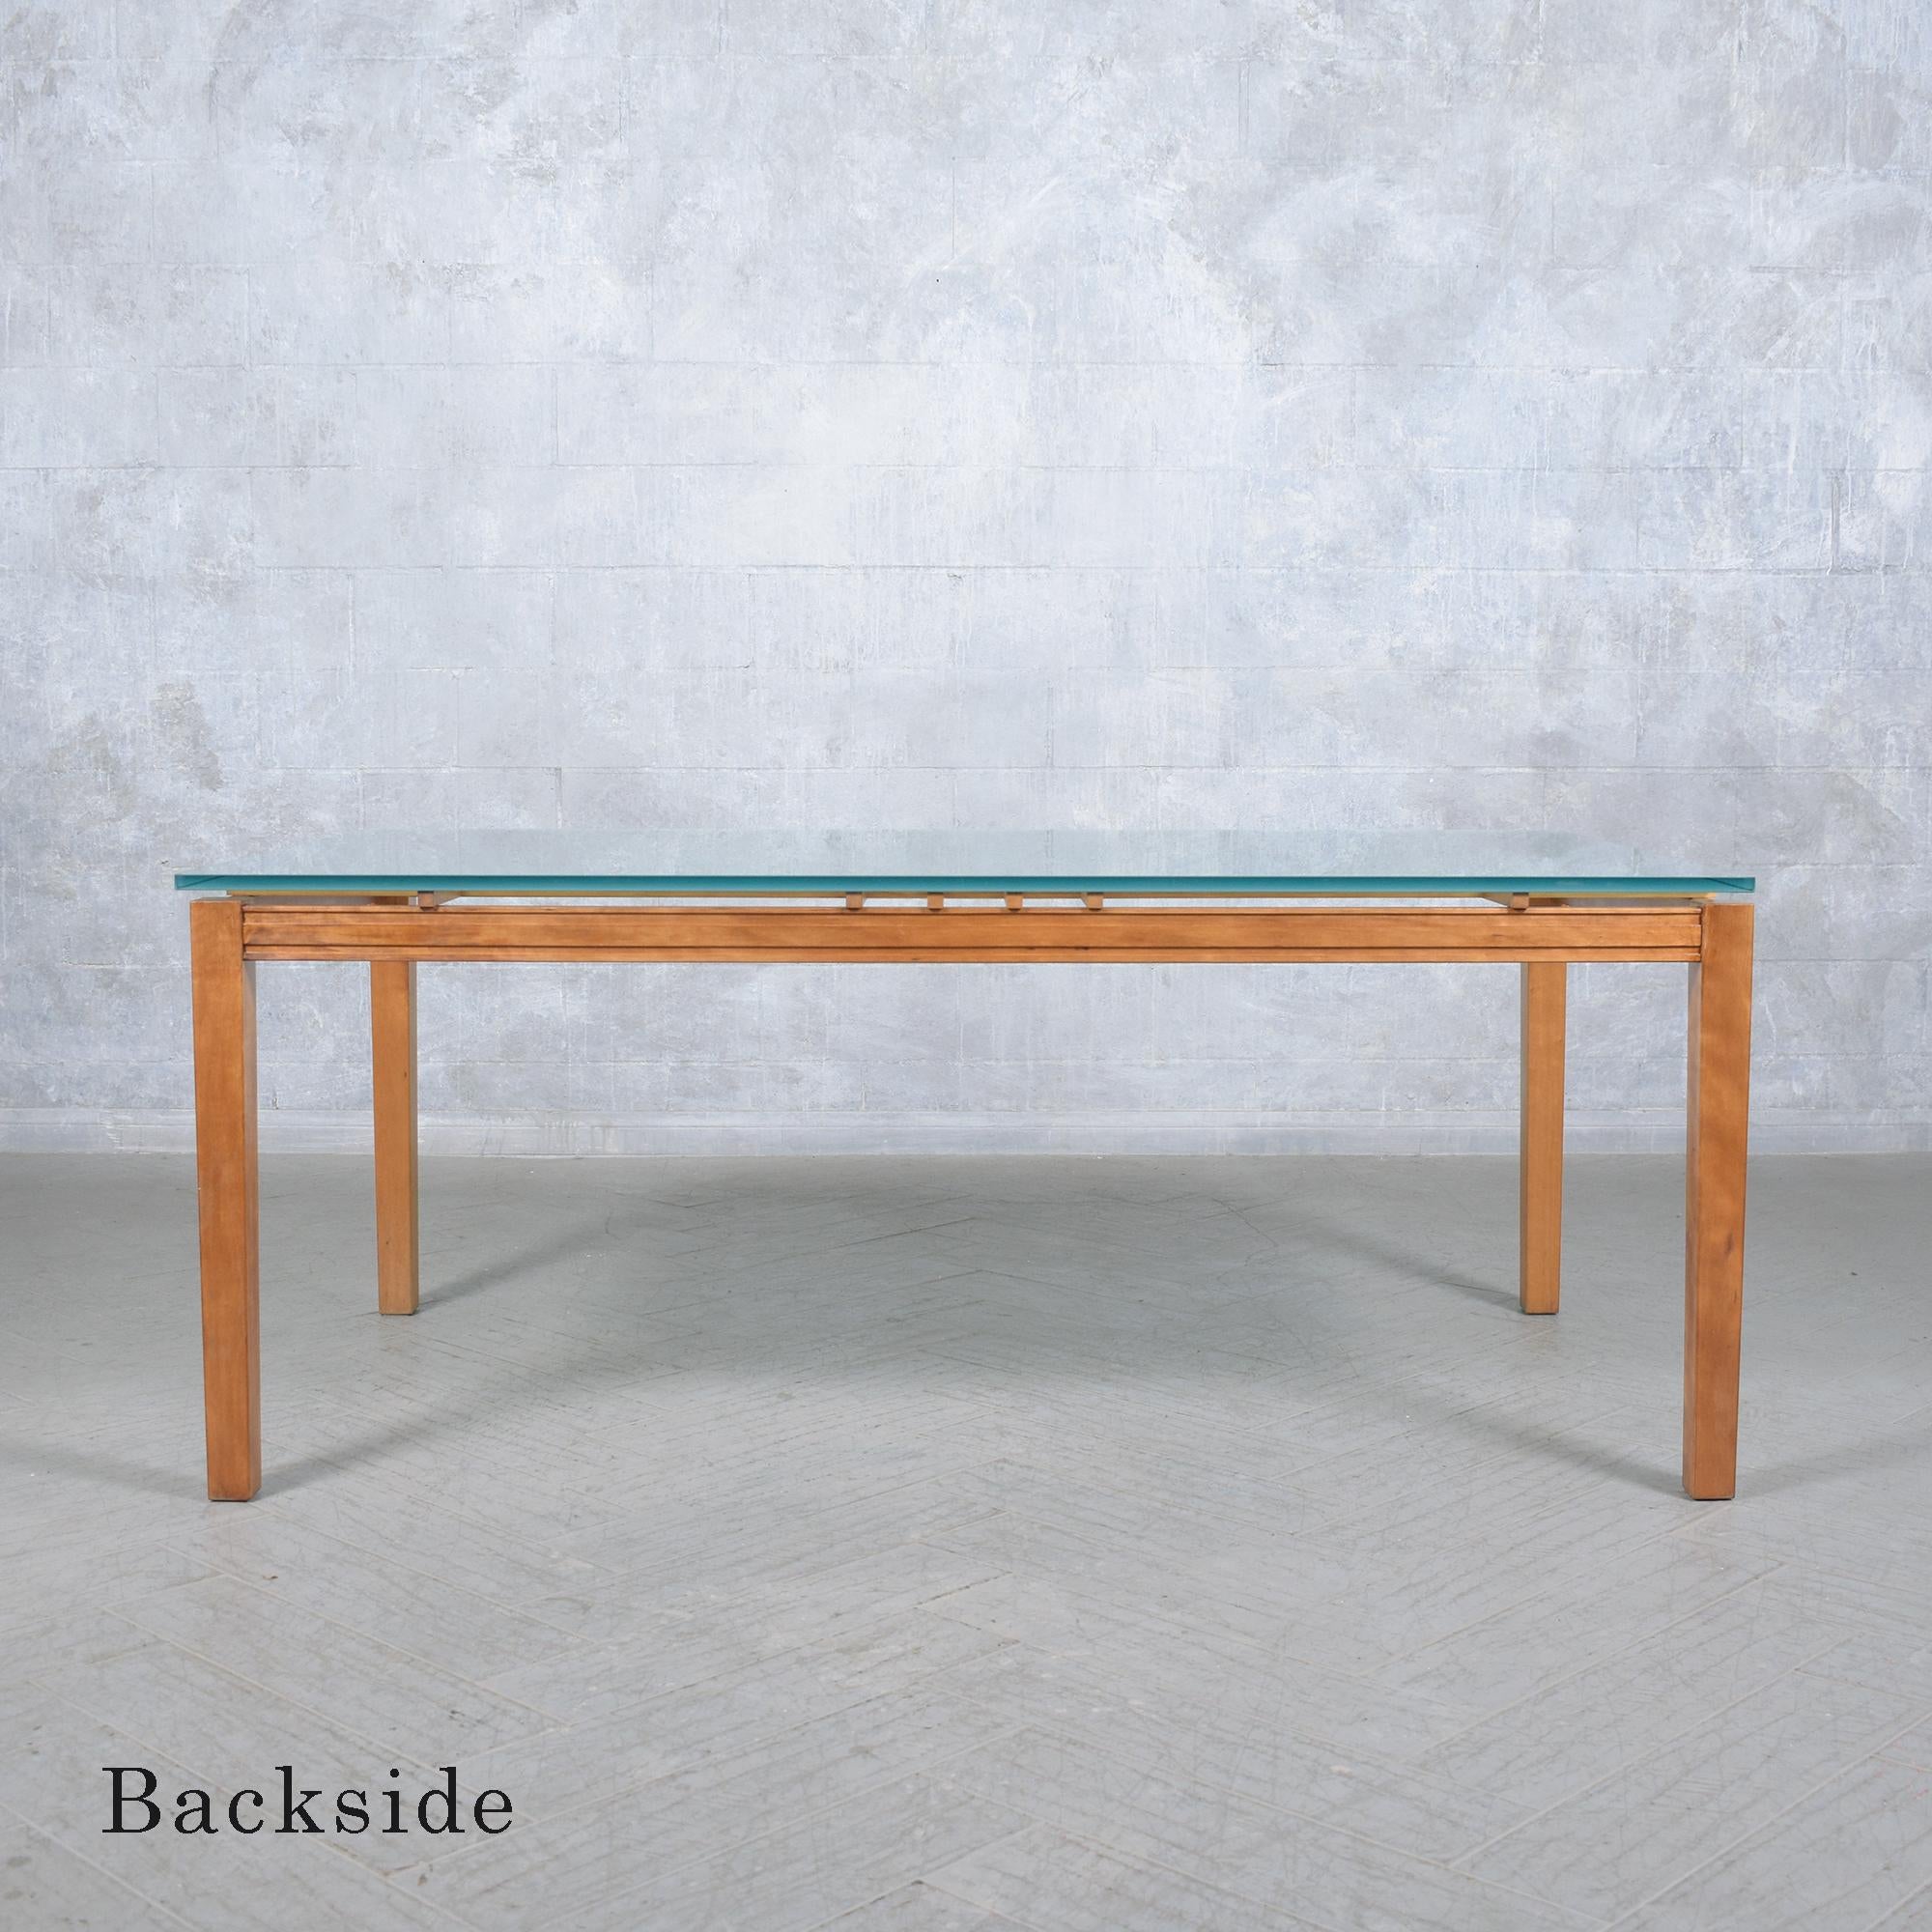 1980s Modern Maple Wood Dining Table with Frosted Glass Top For Sale 3